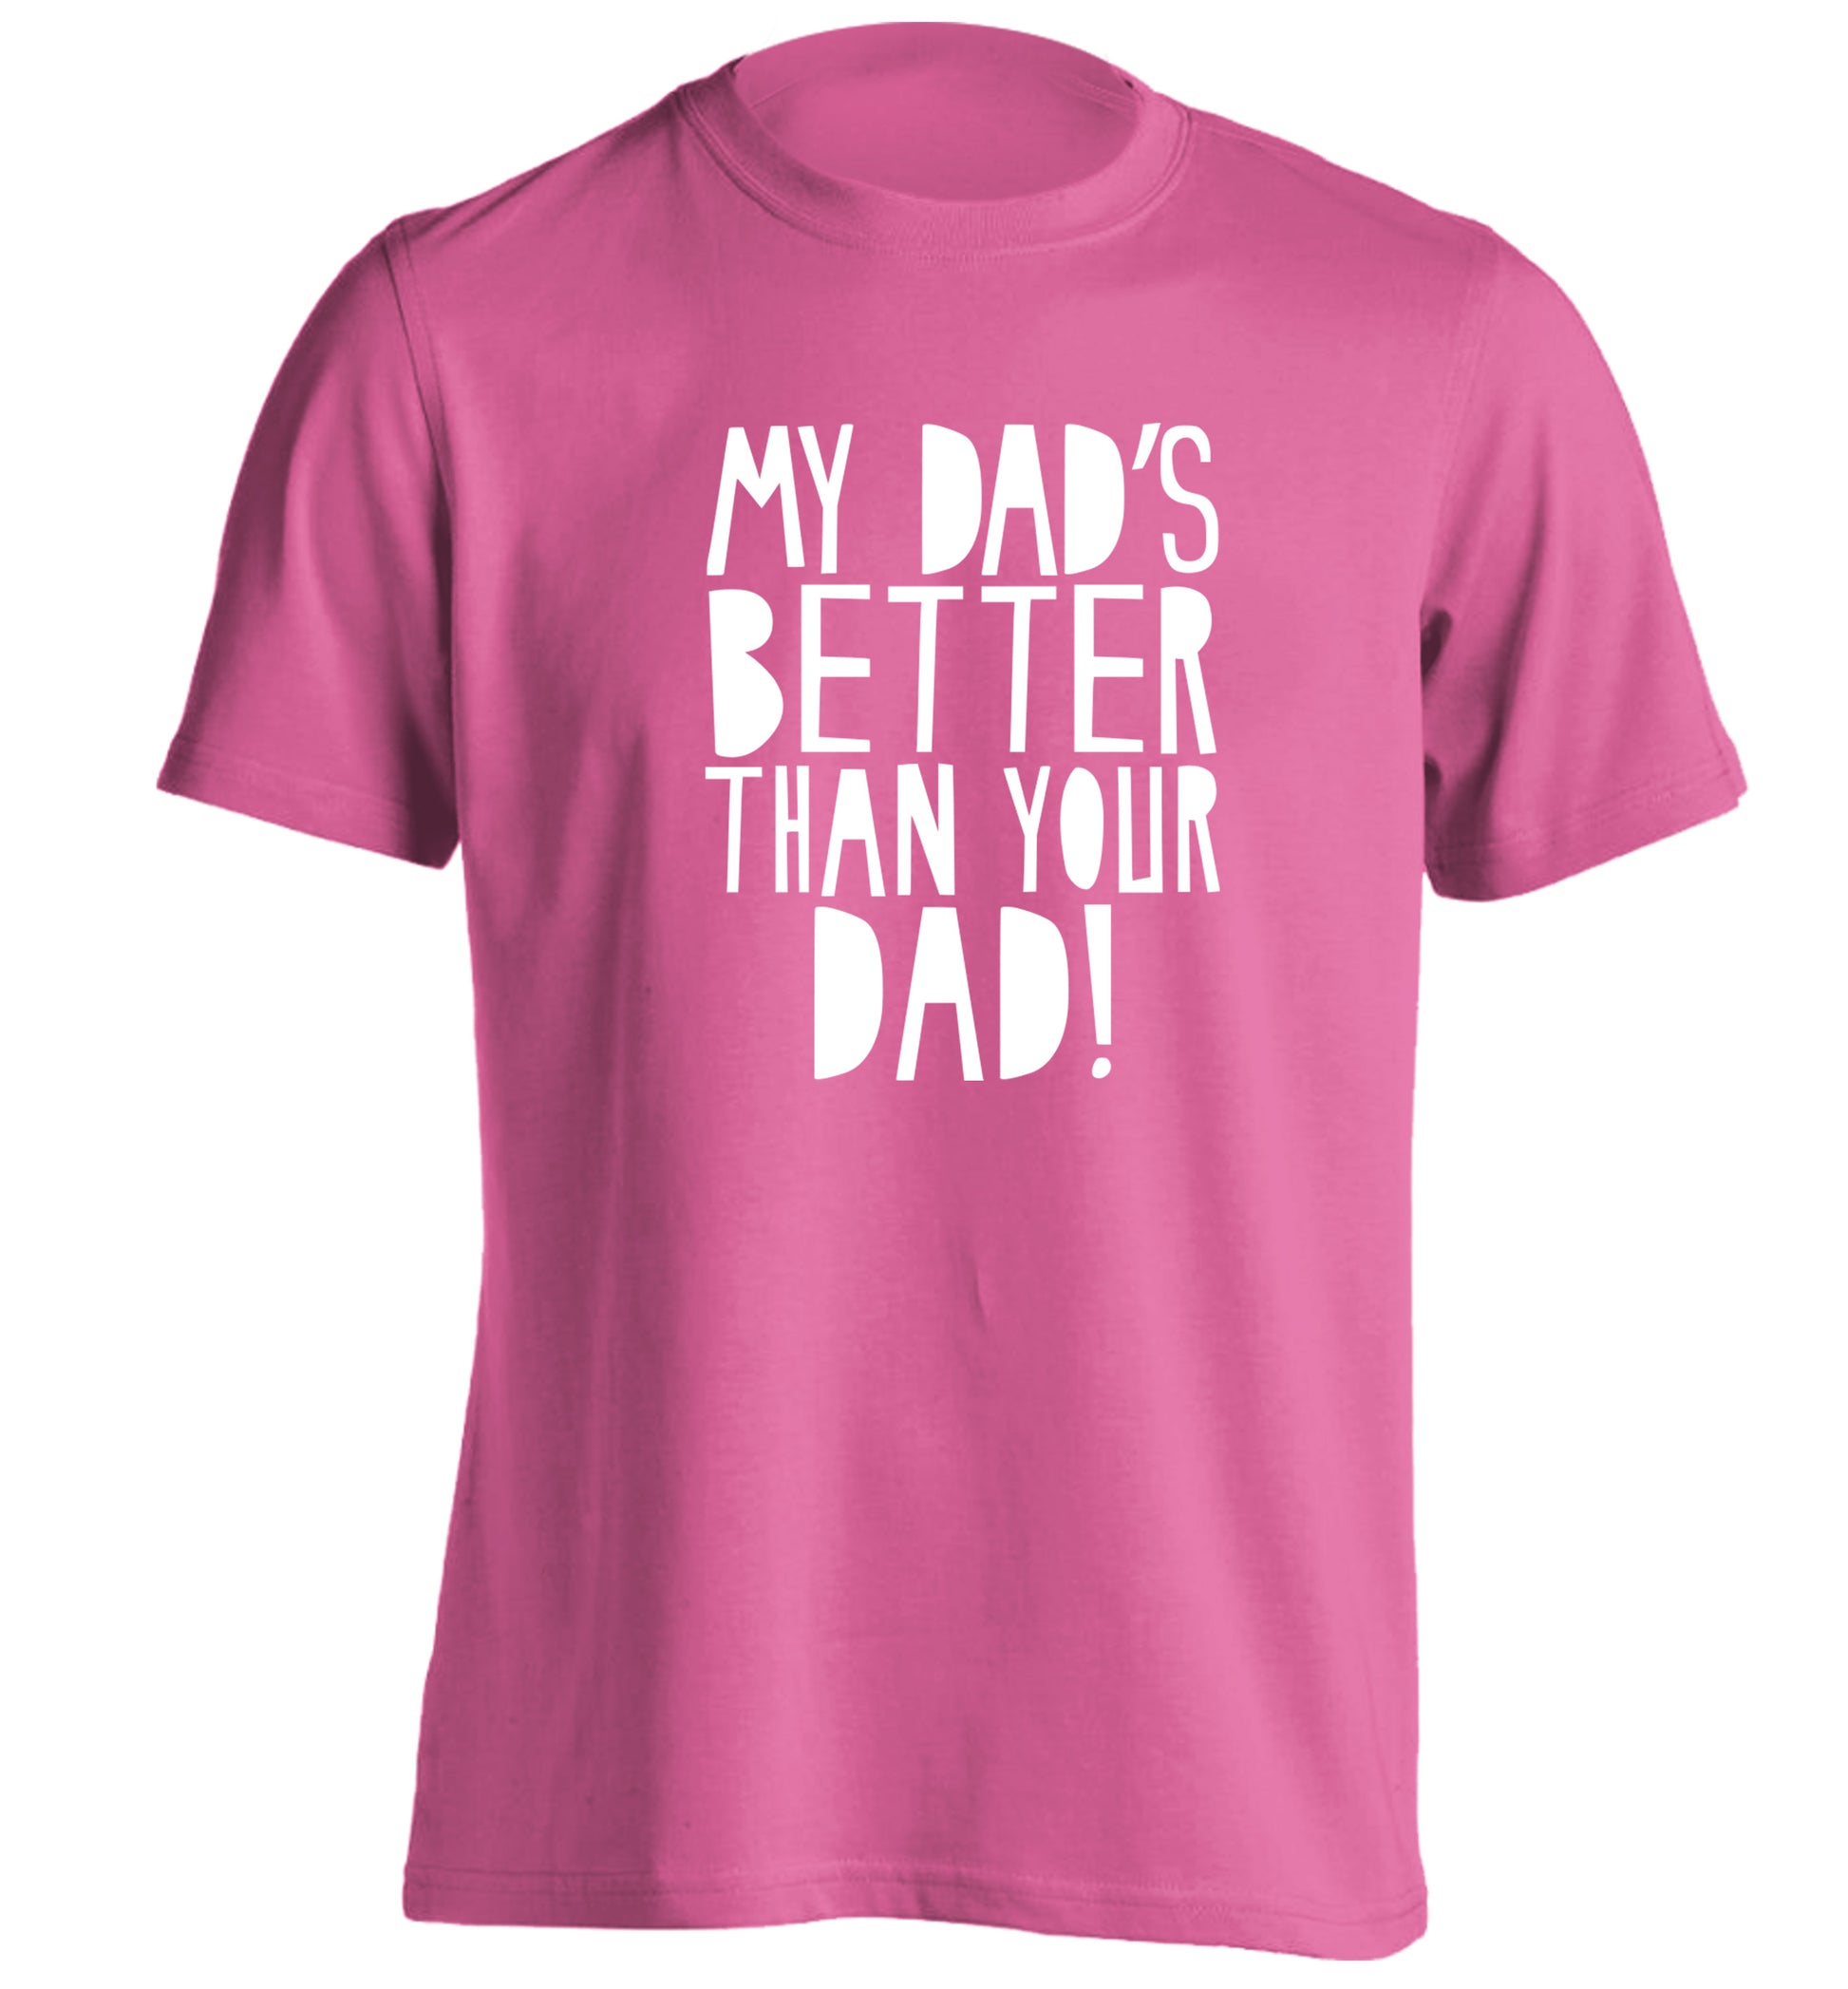 My dad's better than your dad adults unisex pink Tshirt 2XL